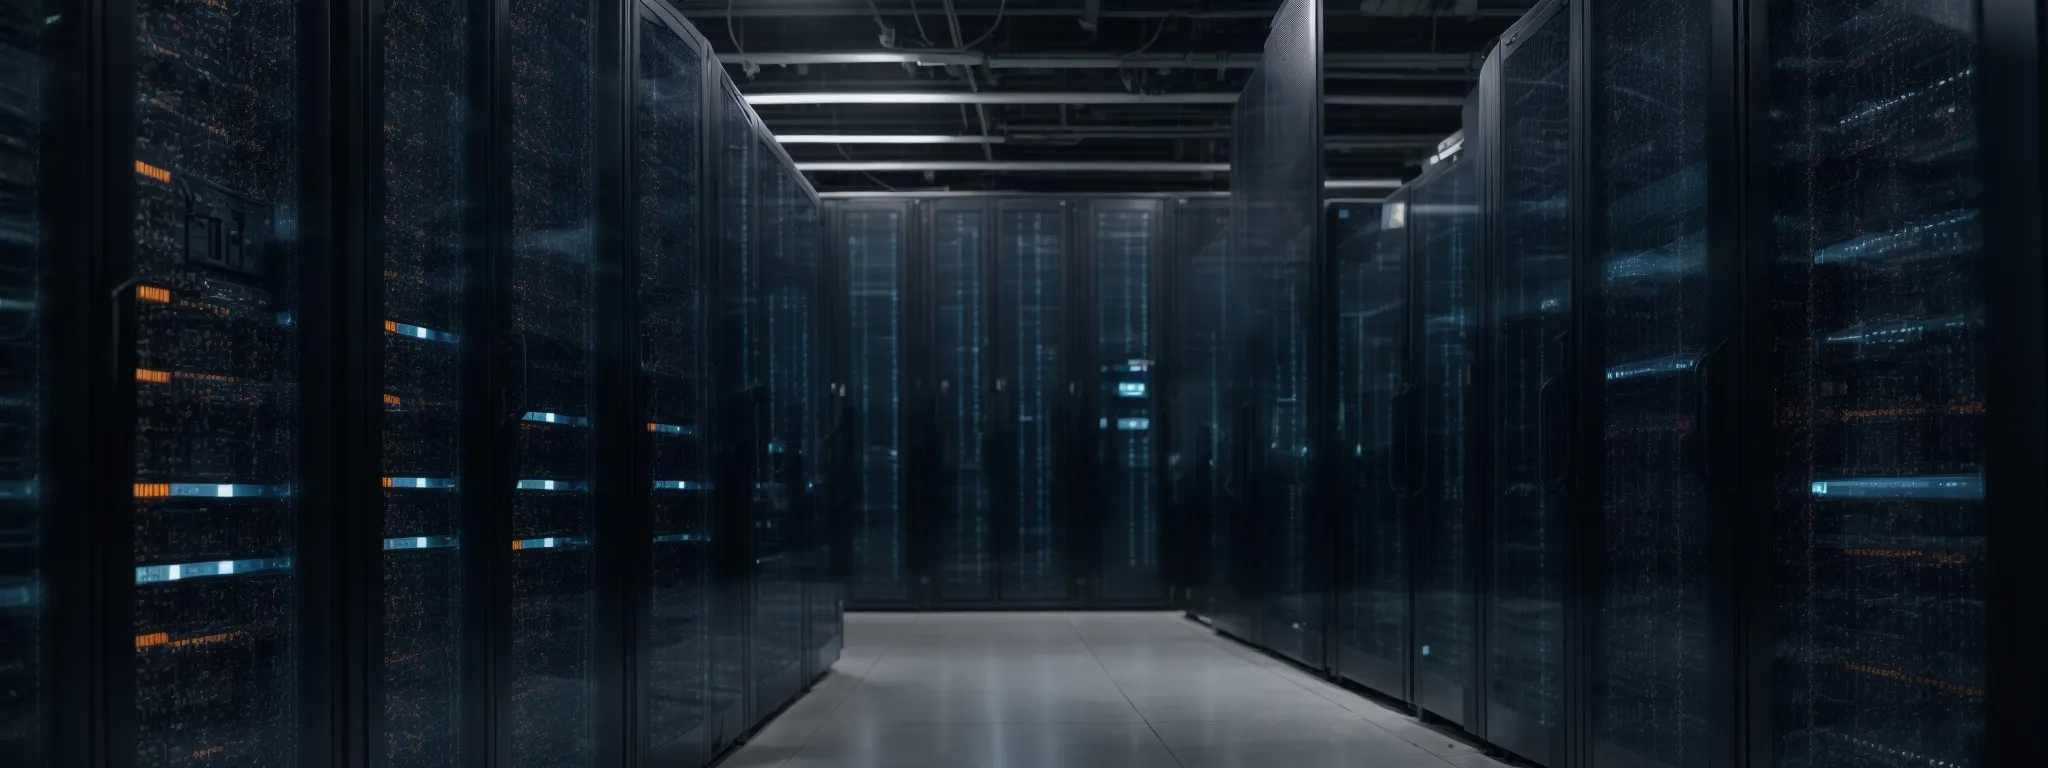 a row of secured server racks in a data center with a map pinpointing different countries in the background.